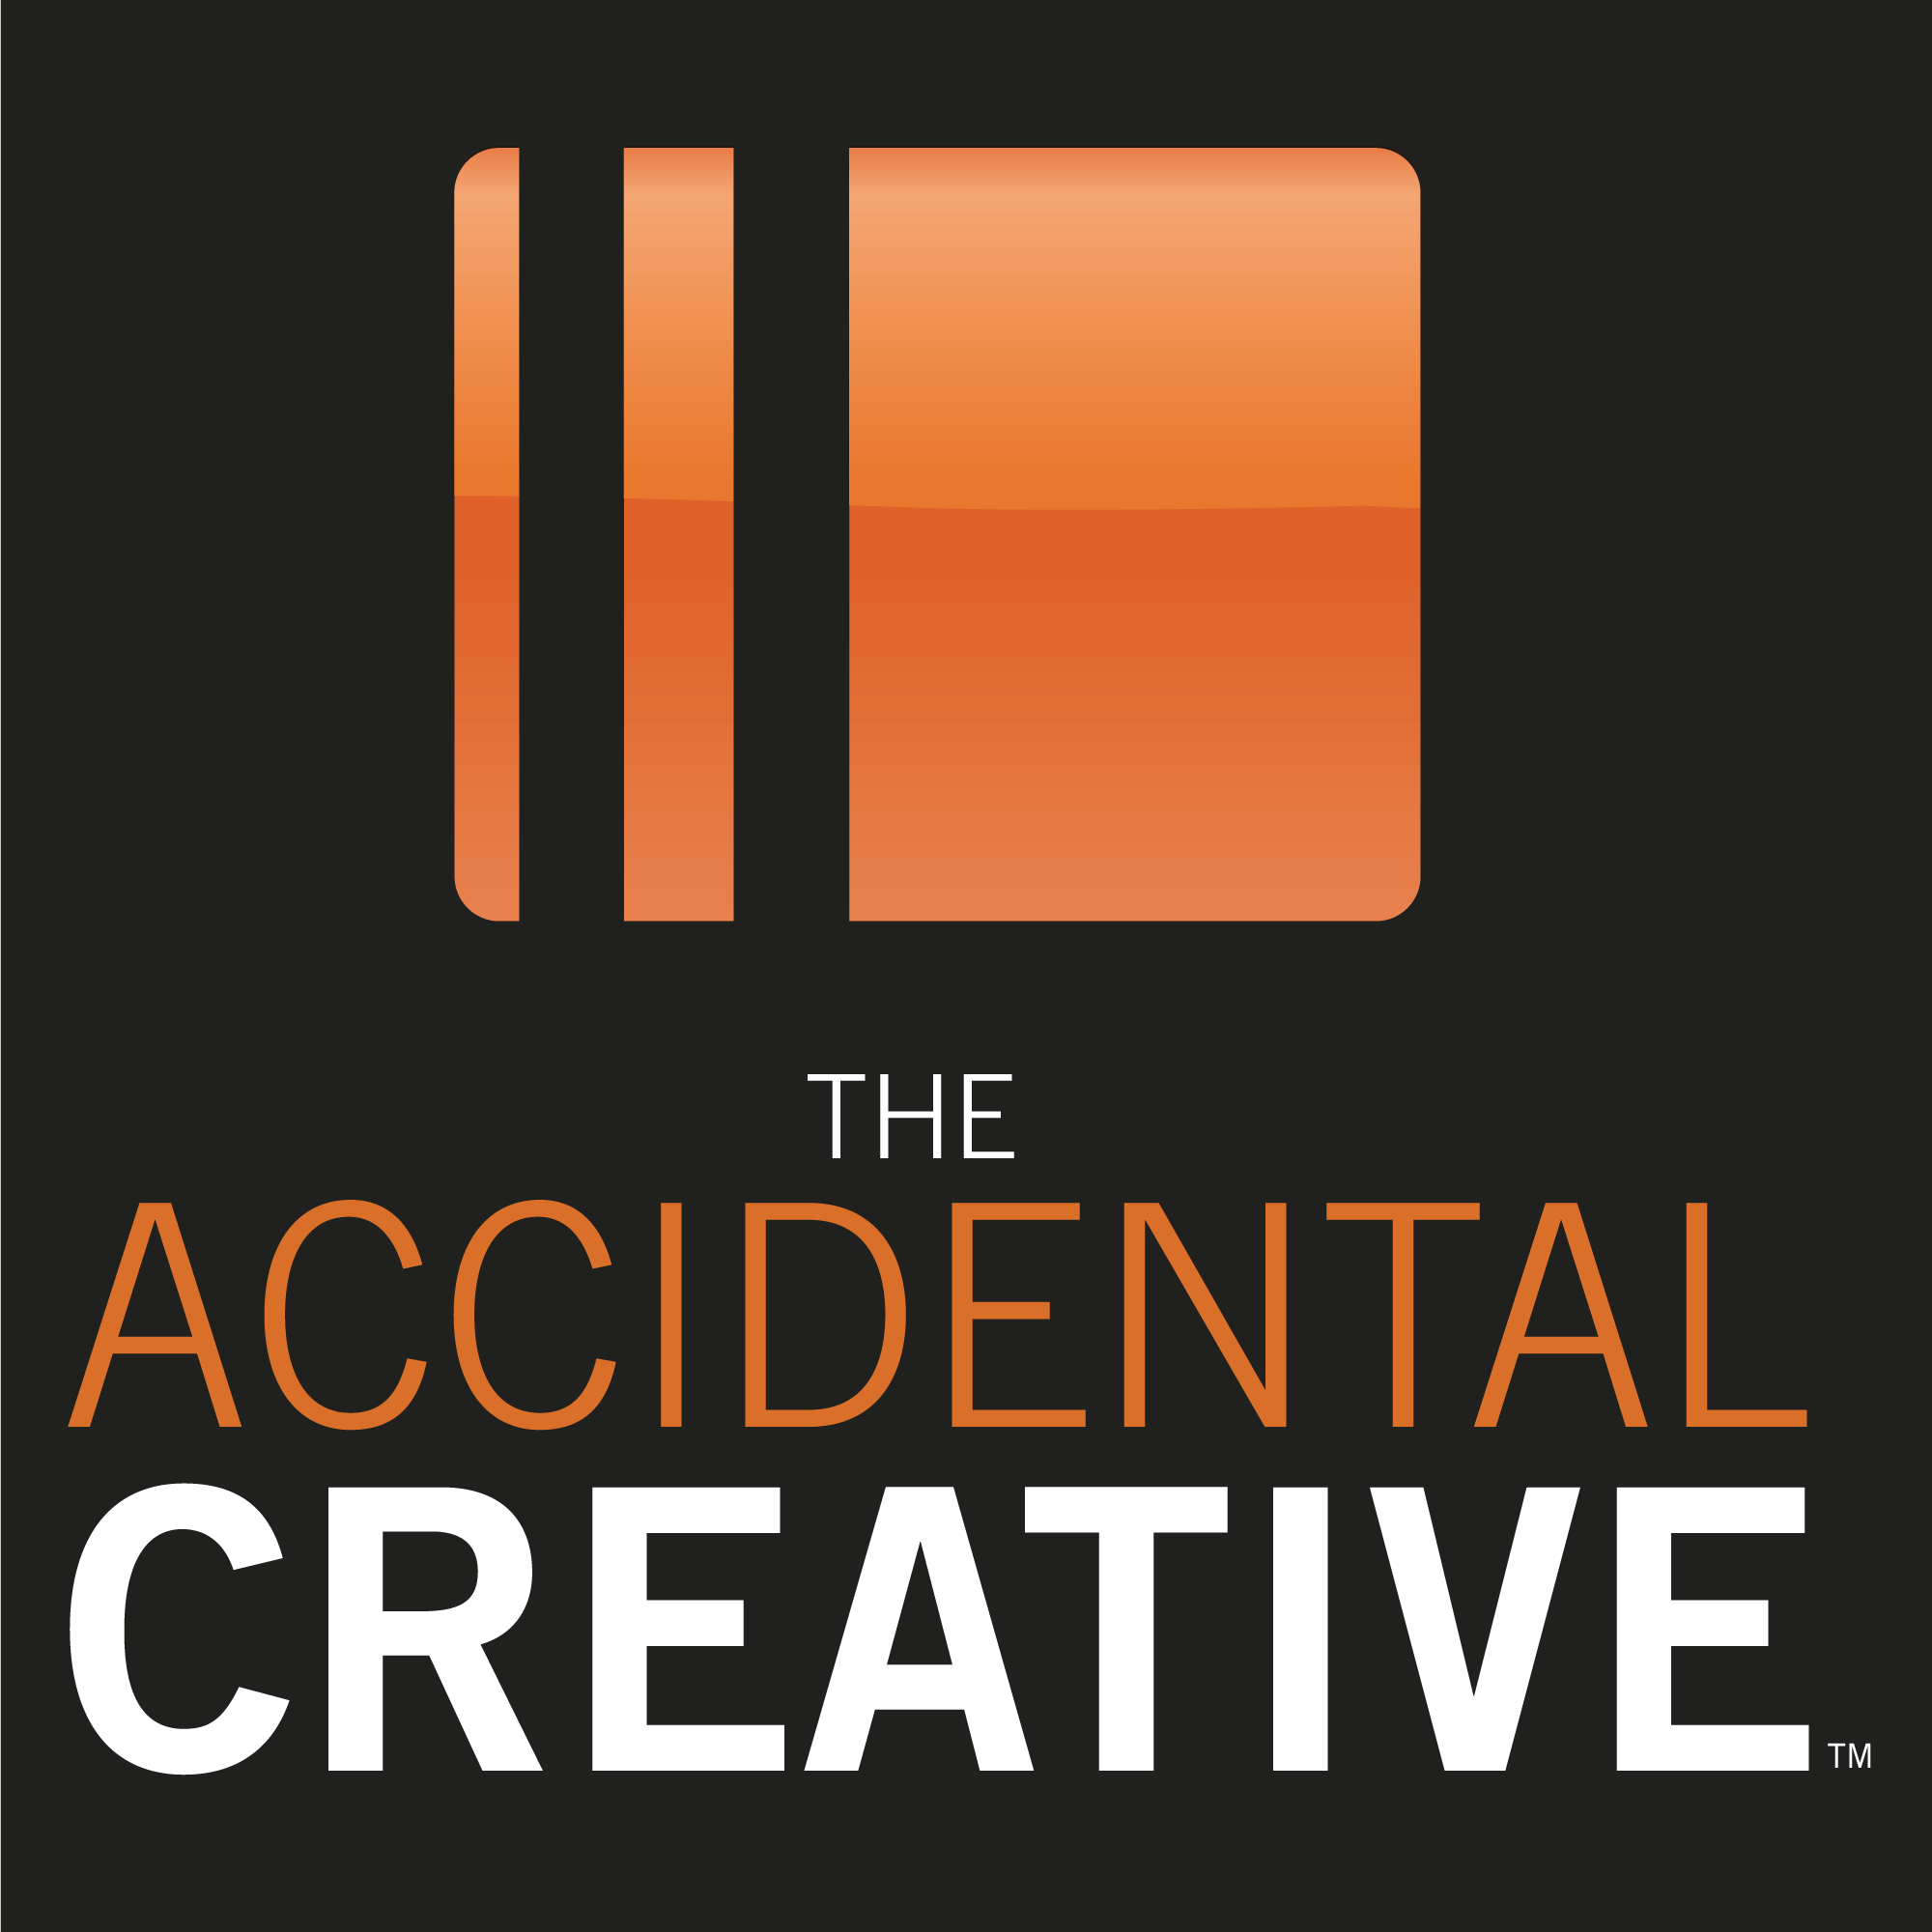 Graphic logo of Accidental Creative podcast